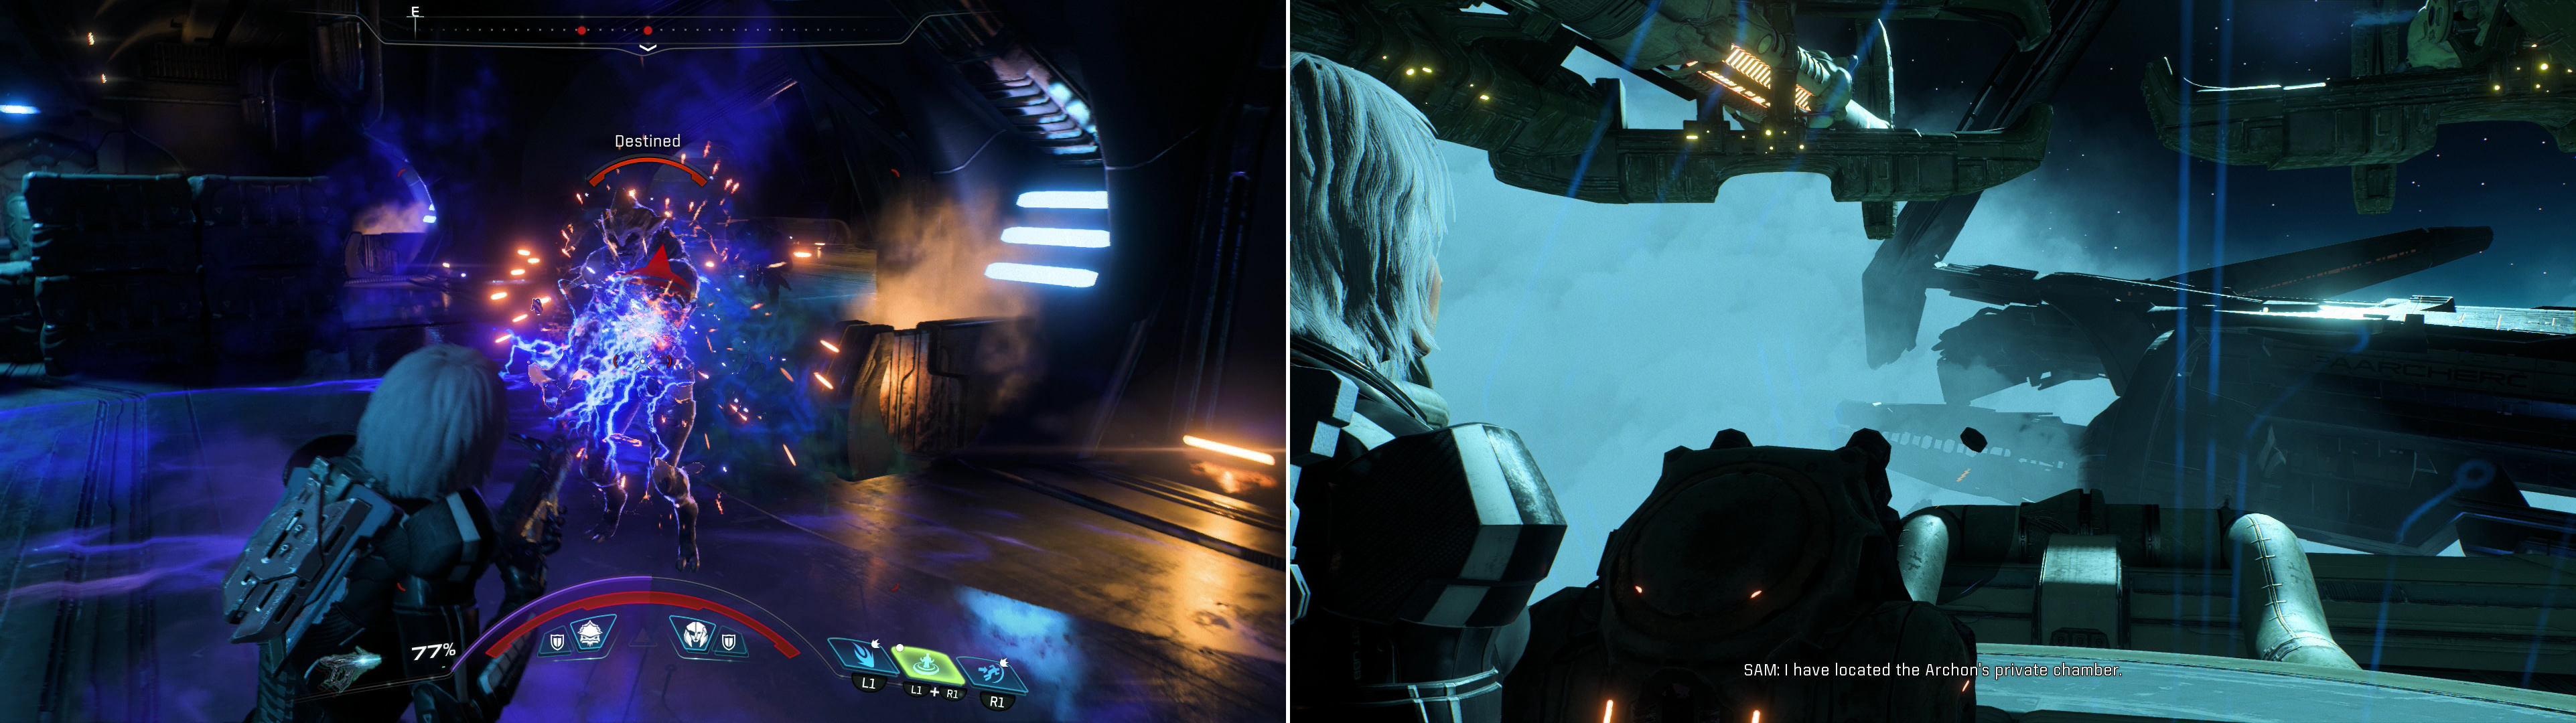 Fight the Kett that greet you when you enter the Kett ship (left) then access a terminal to learn the location of the Archons chamber (right).